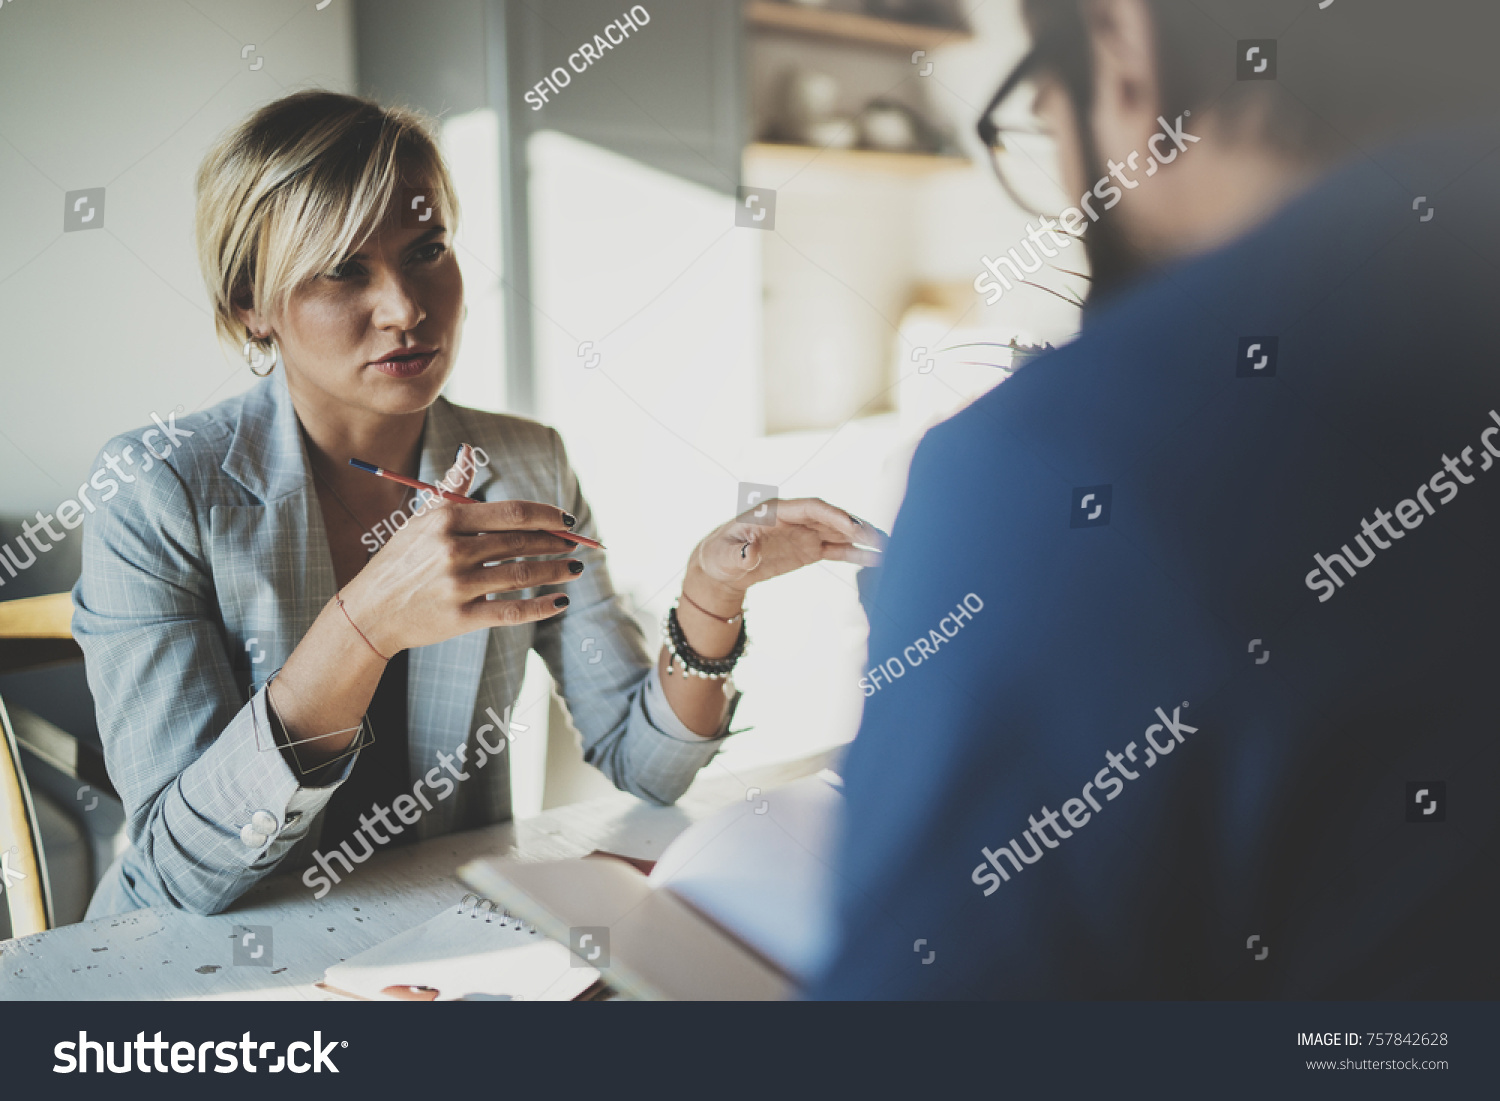 Coworkers working process at home.Young blonde woman working together with bearded colleague man at modern home office.People making conversation together.Blurred background.Horizontal #757842628